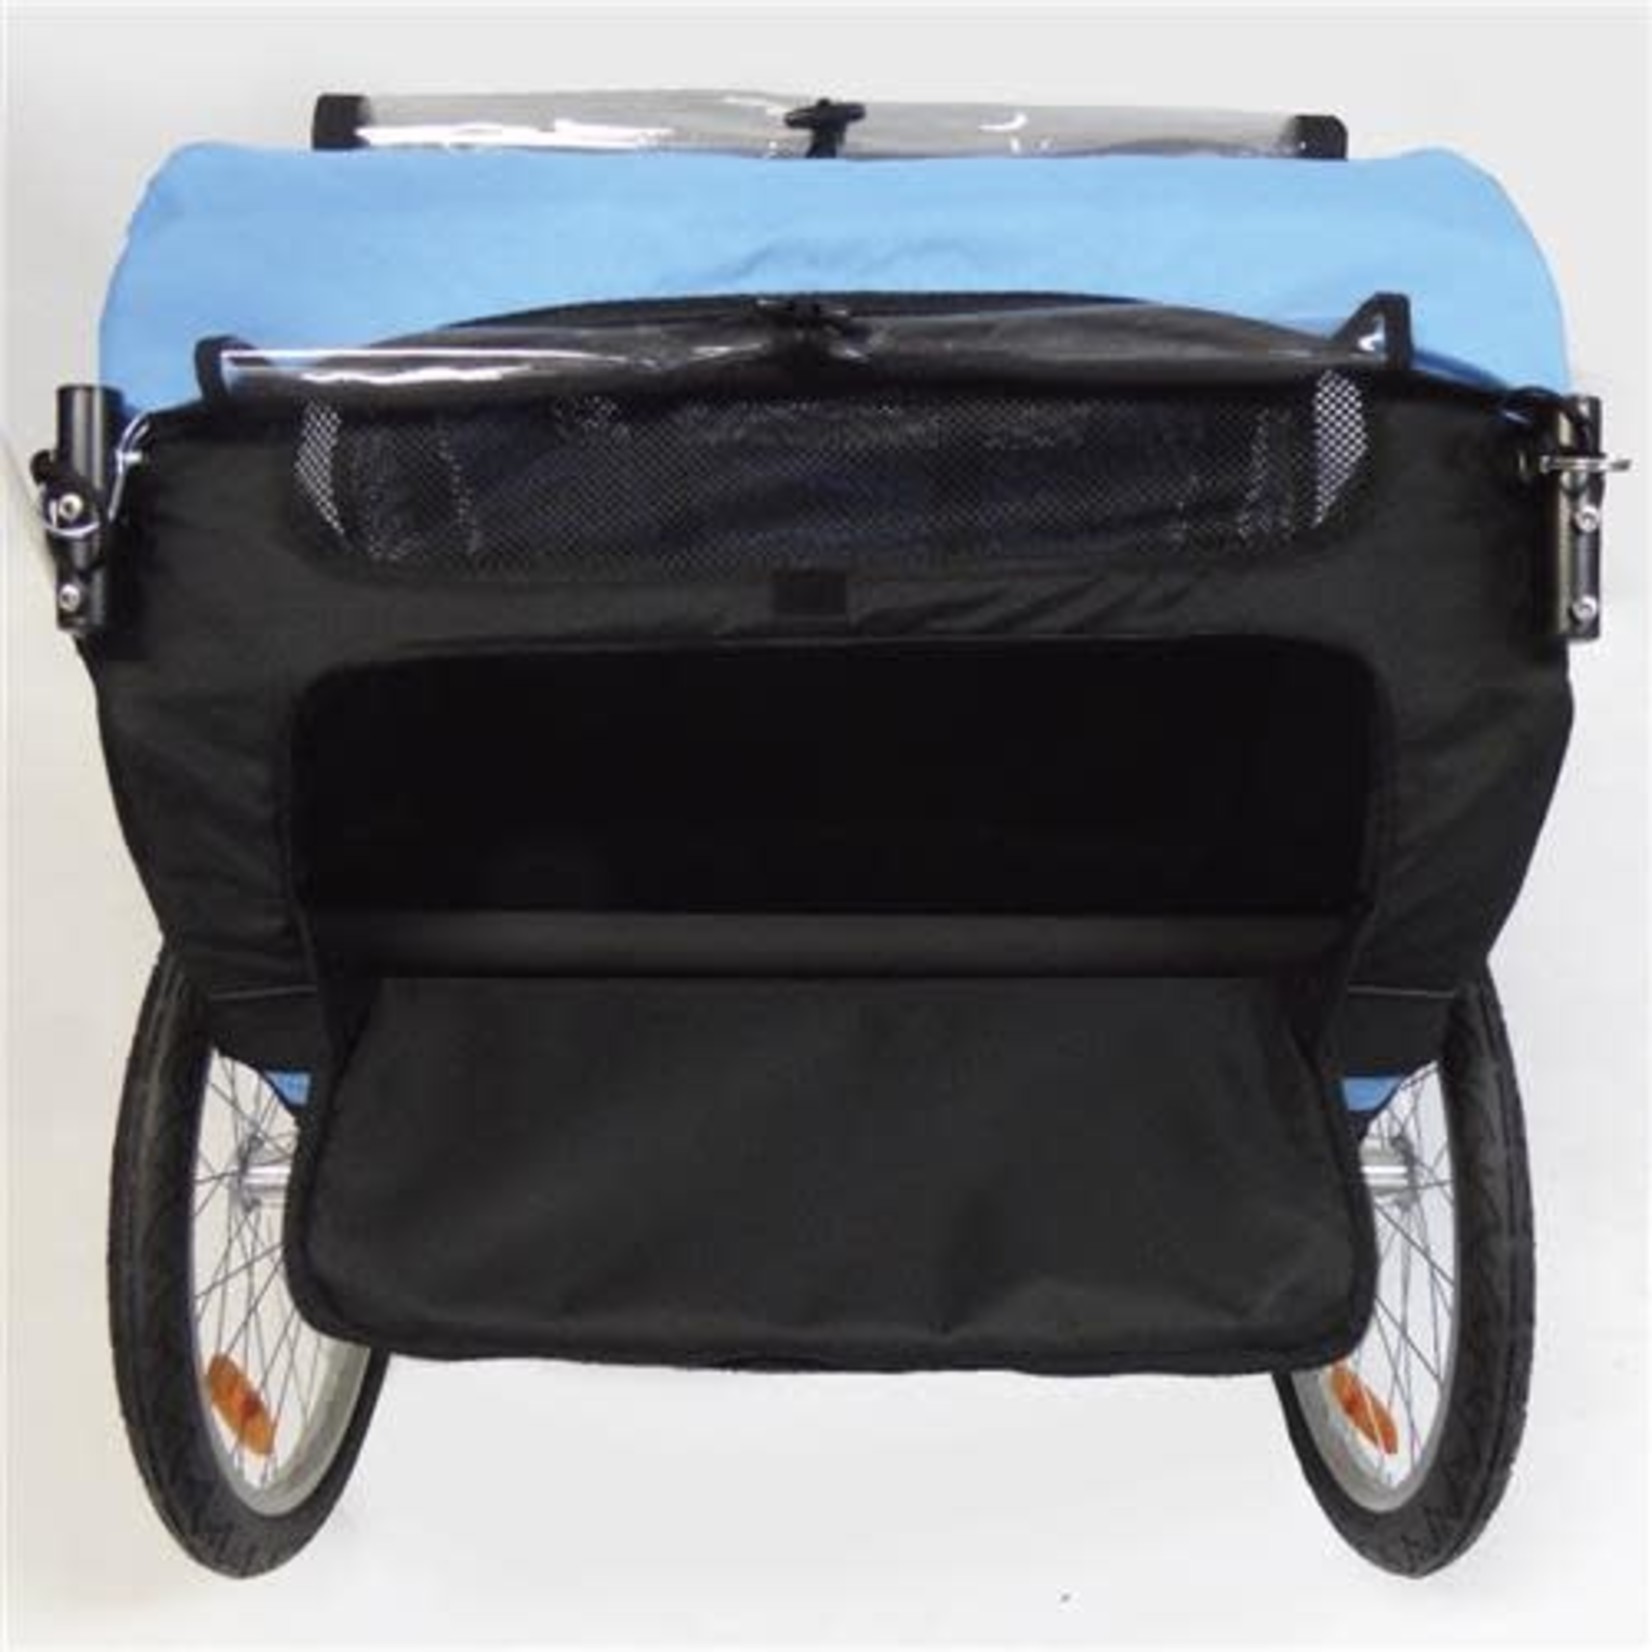 pacific Pacific Bike/Cycling Deluxe 2 In 1 Trailer/Stroller-2 Child Safety Flag Included